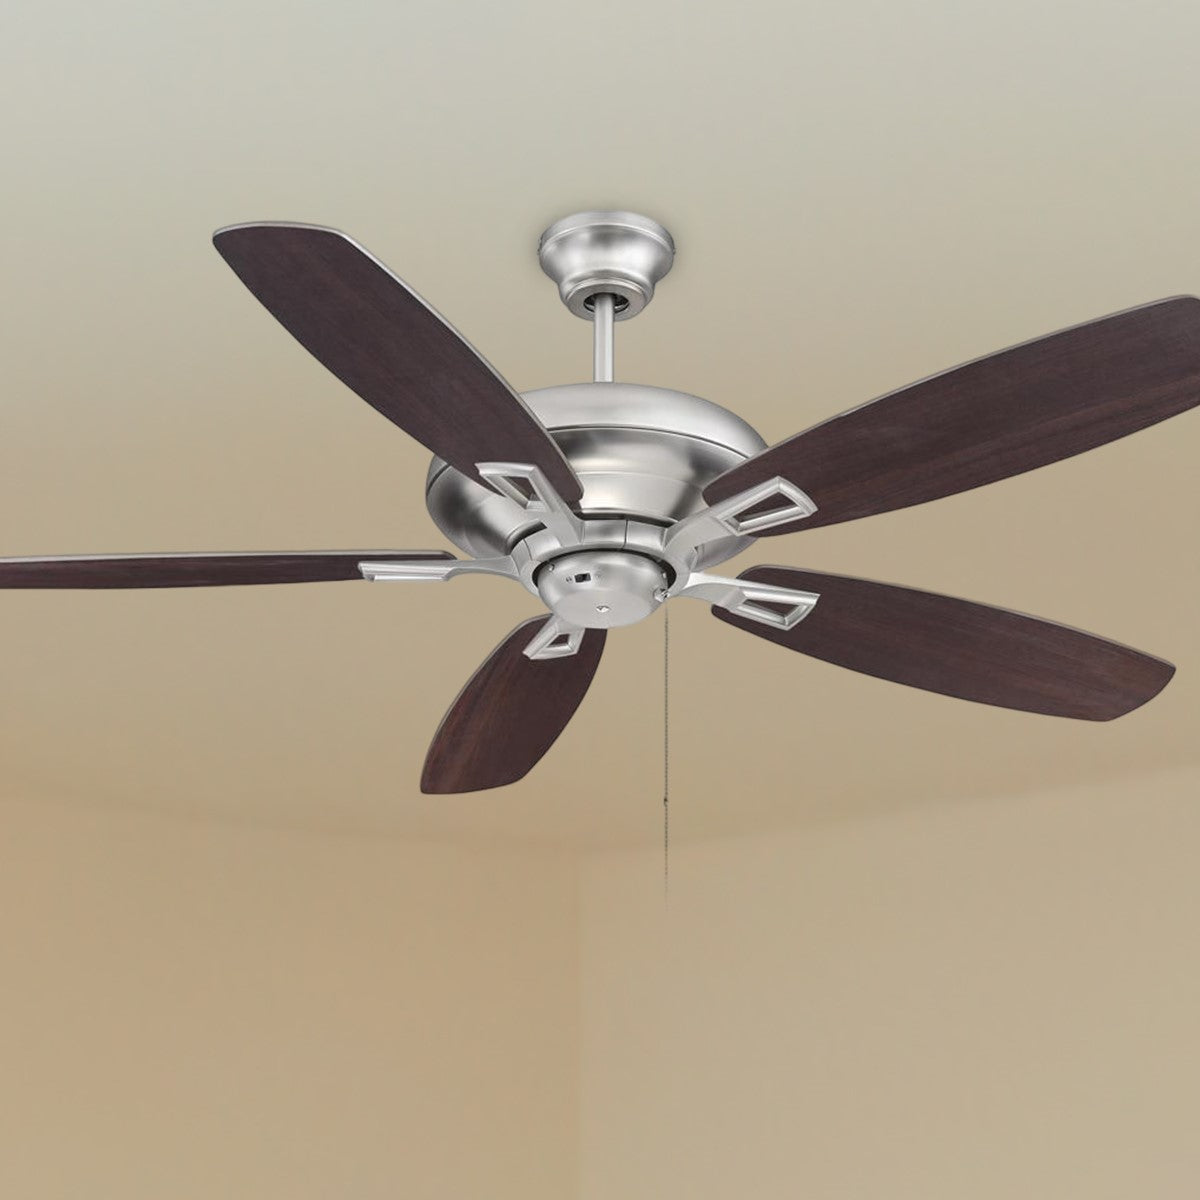 Mystique 52 Inch Satin Nickel Ceiling Fan With Light, 5 Chestnut/Silver Reversible Blades